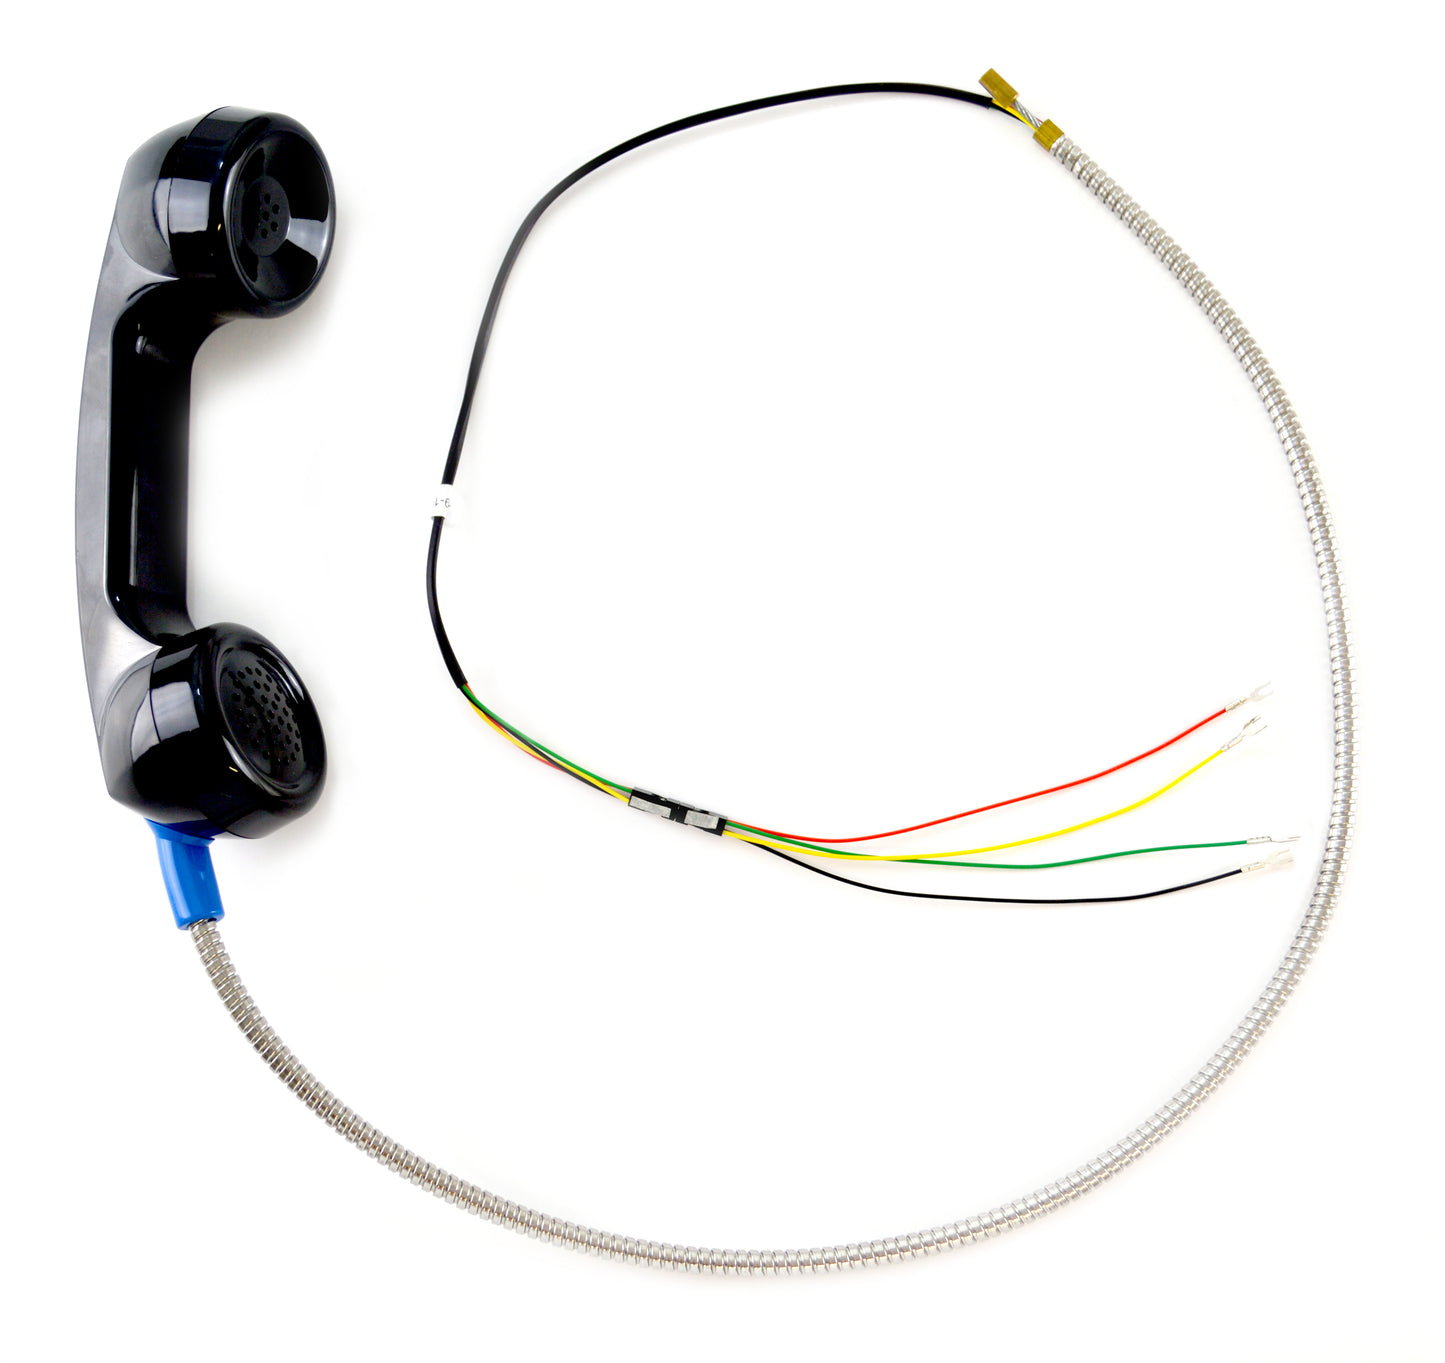 Modular to Spade Adapter for Payphone Handset